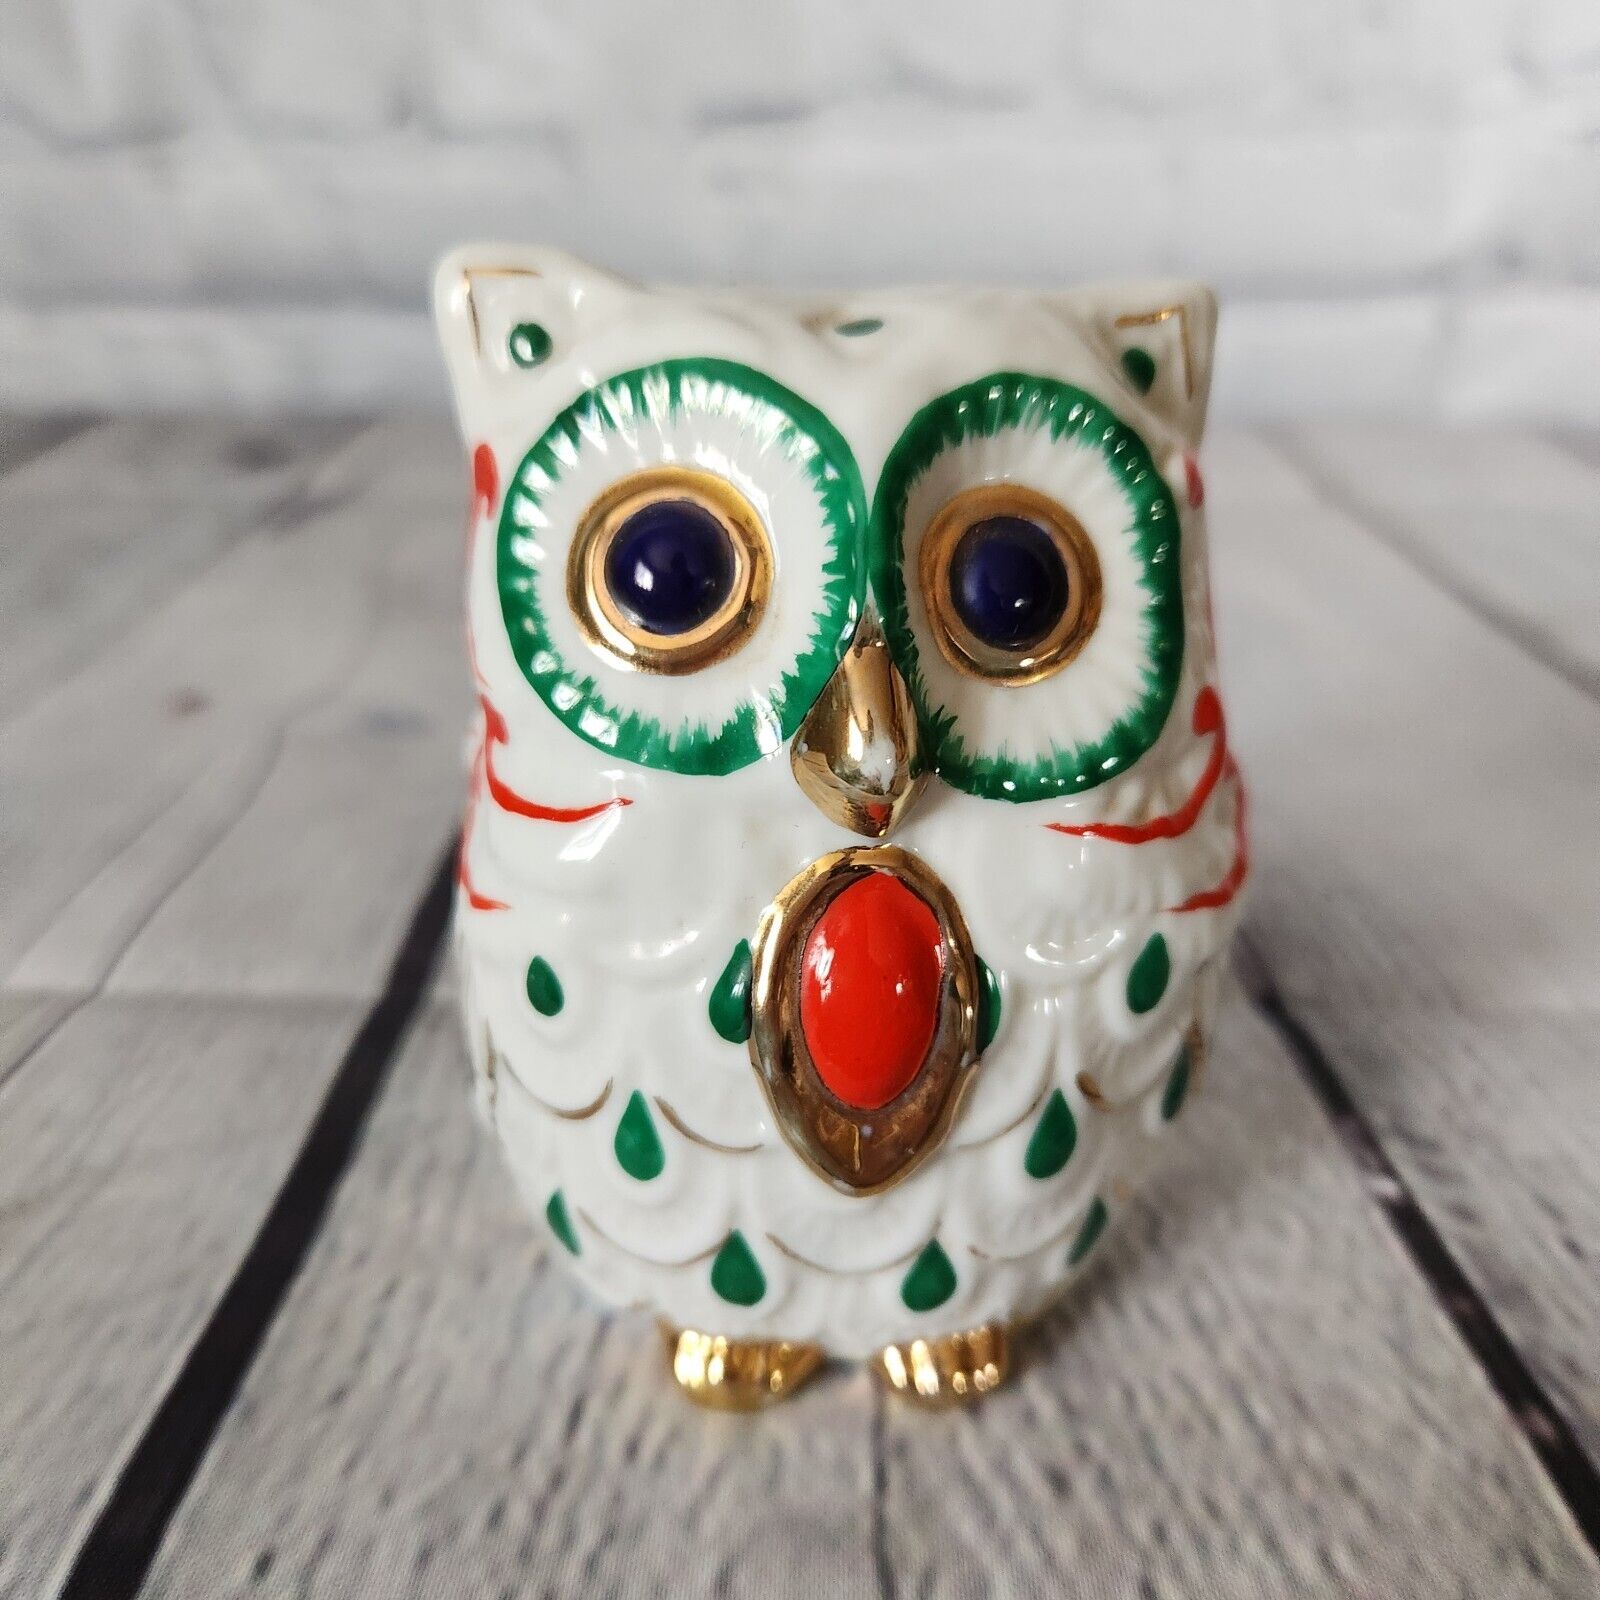 San Marco Buccellati Porcelain Owl Italy White w Gold & Jewel Accents 